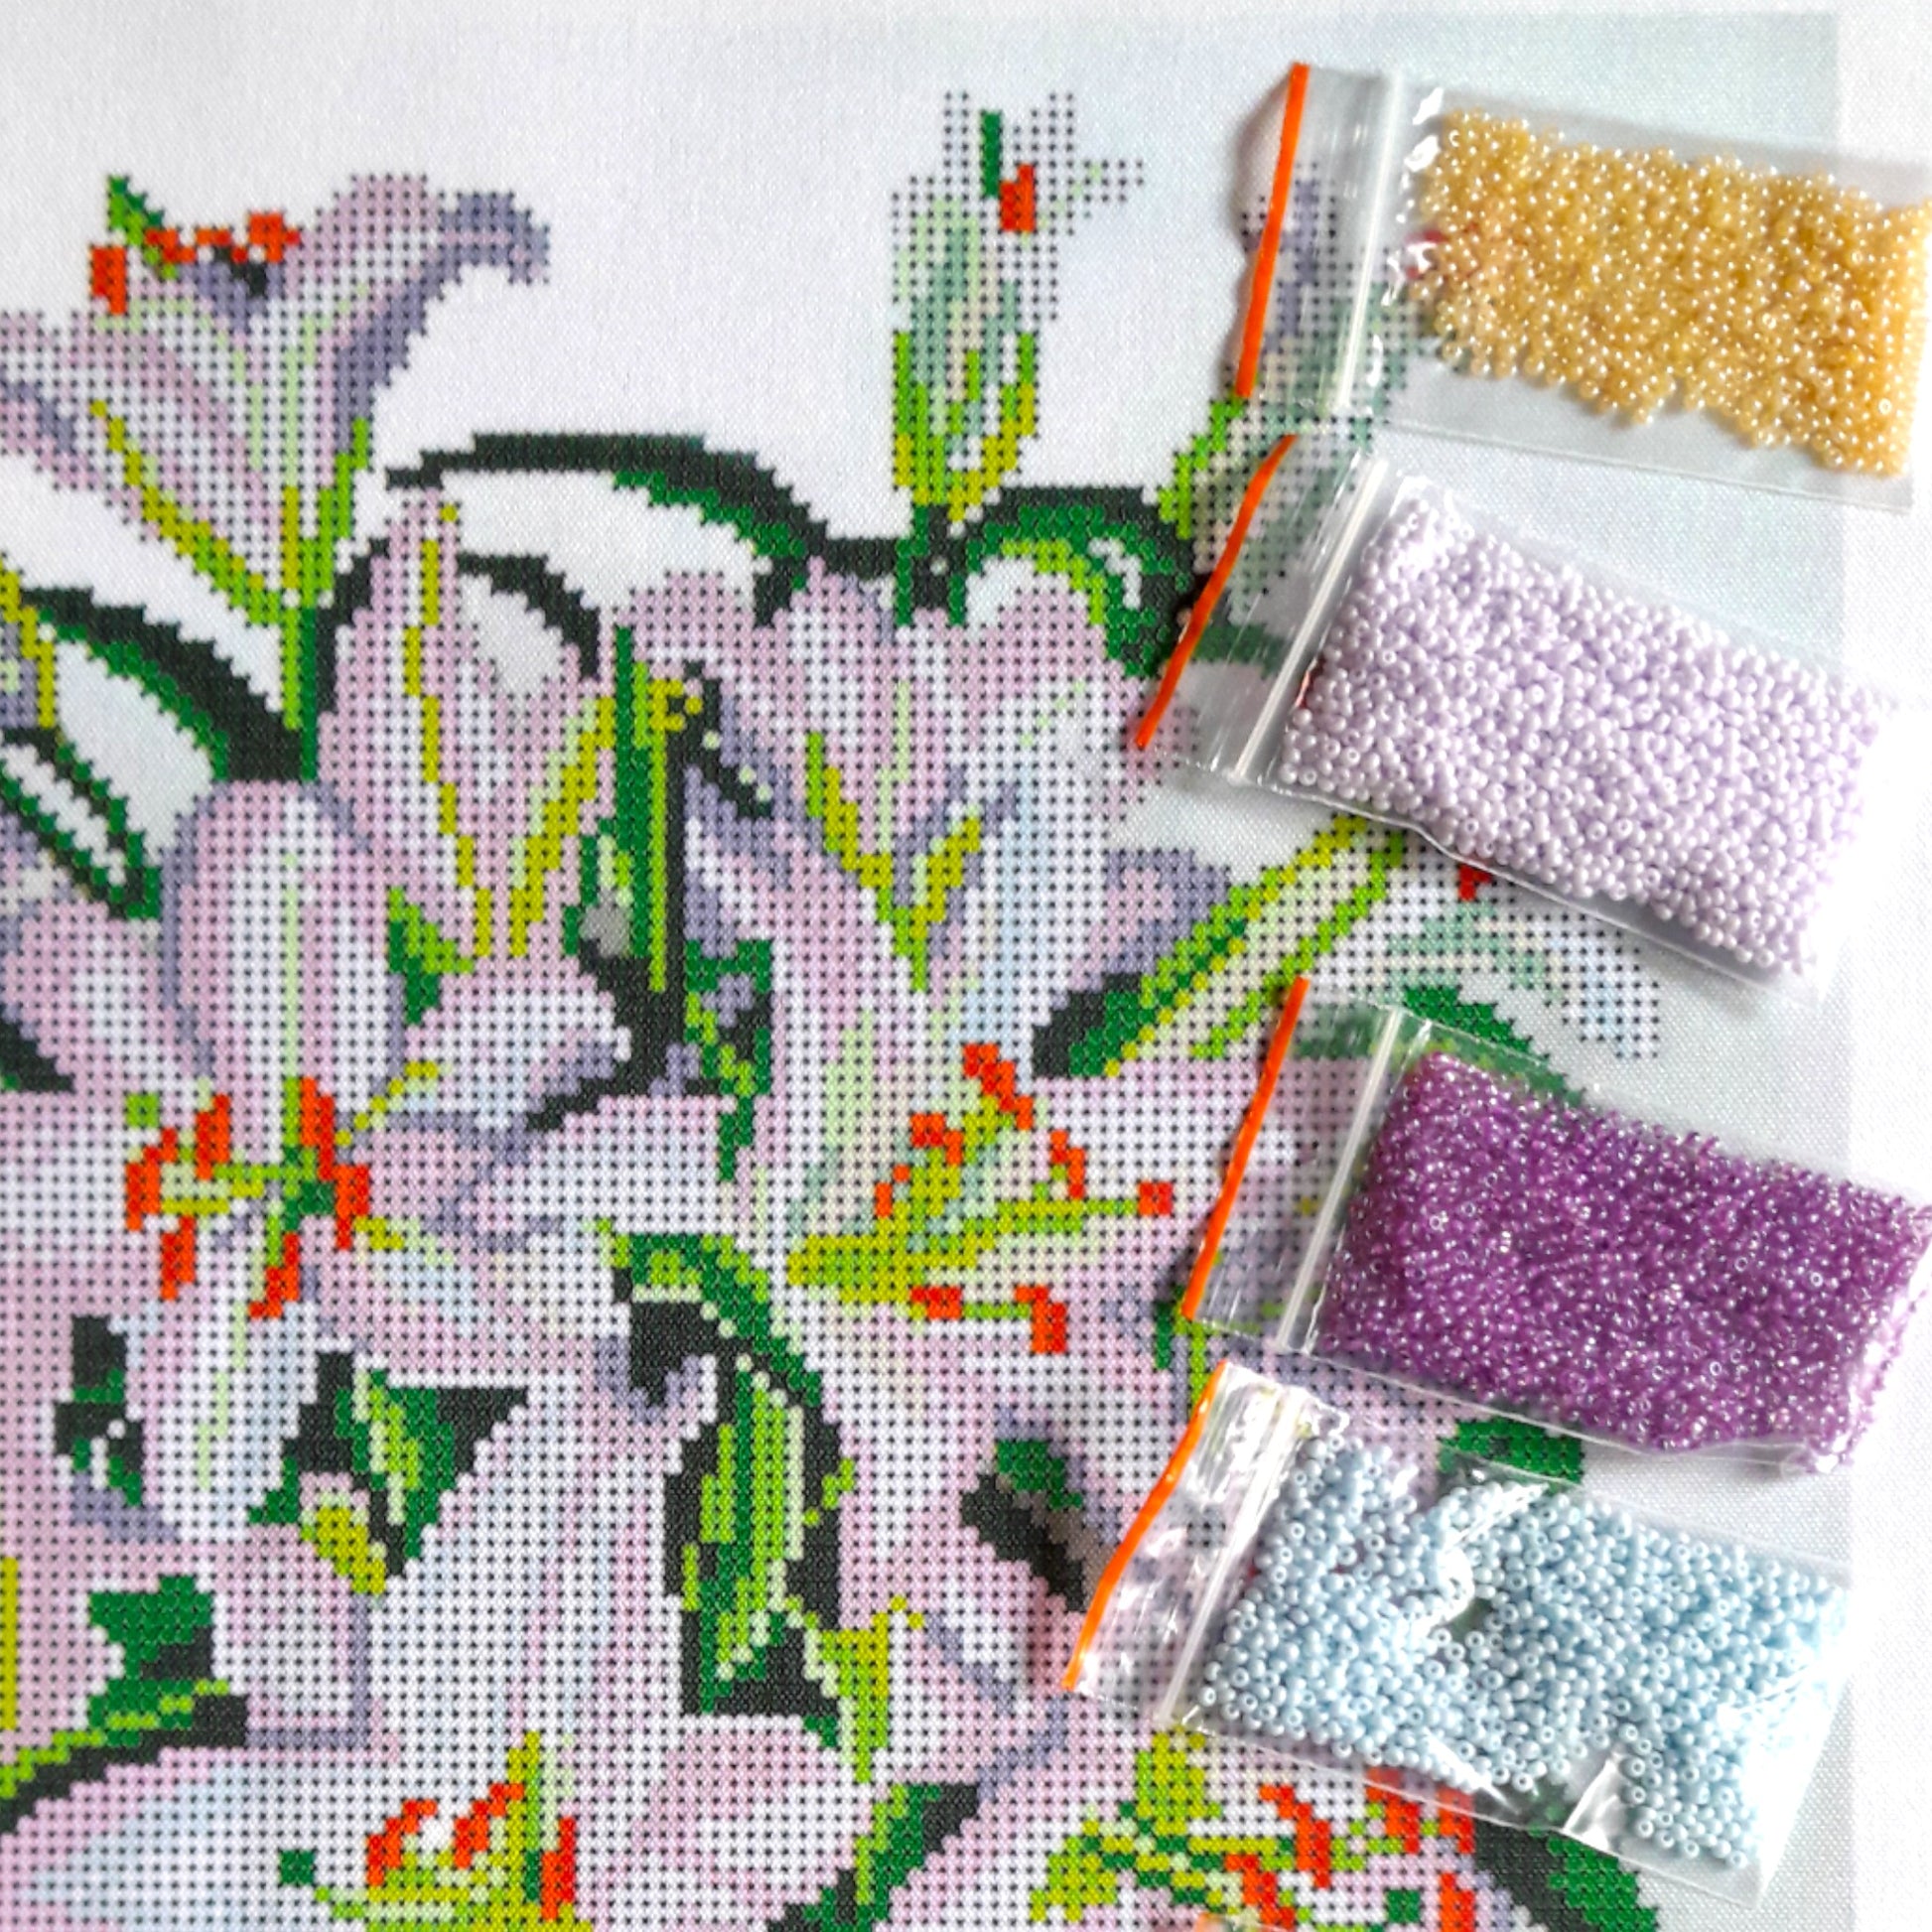 Bead embroidery kit "White lilies". Home decor. - VadymShop